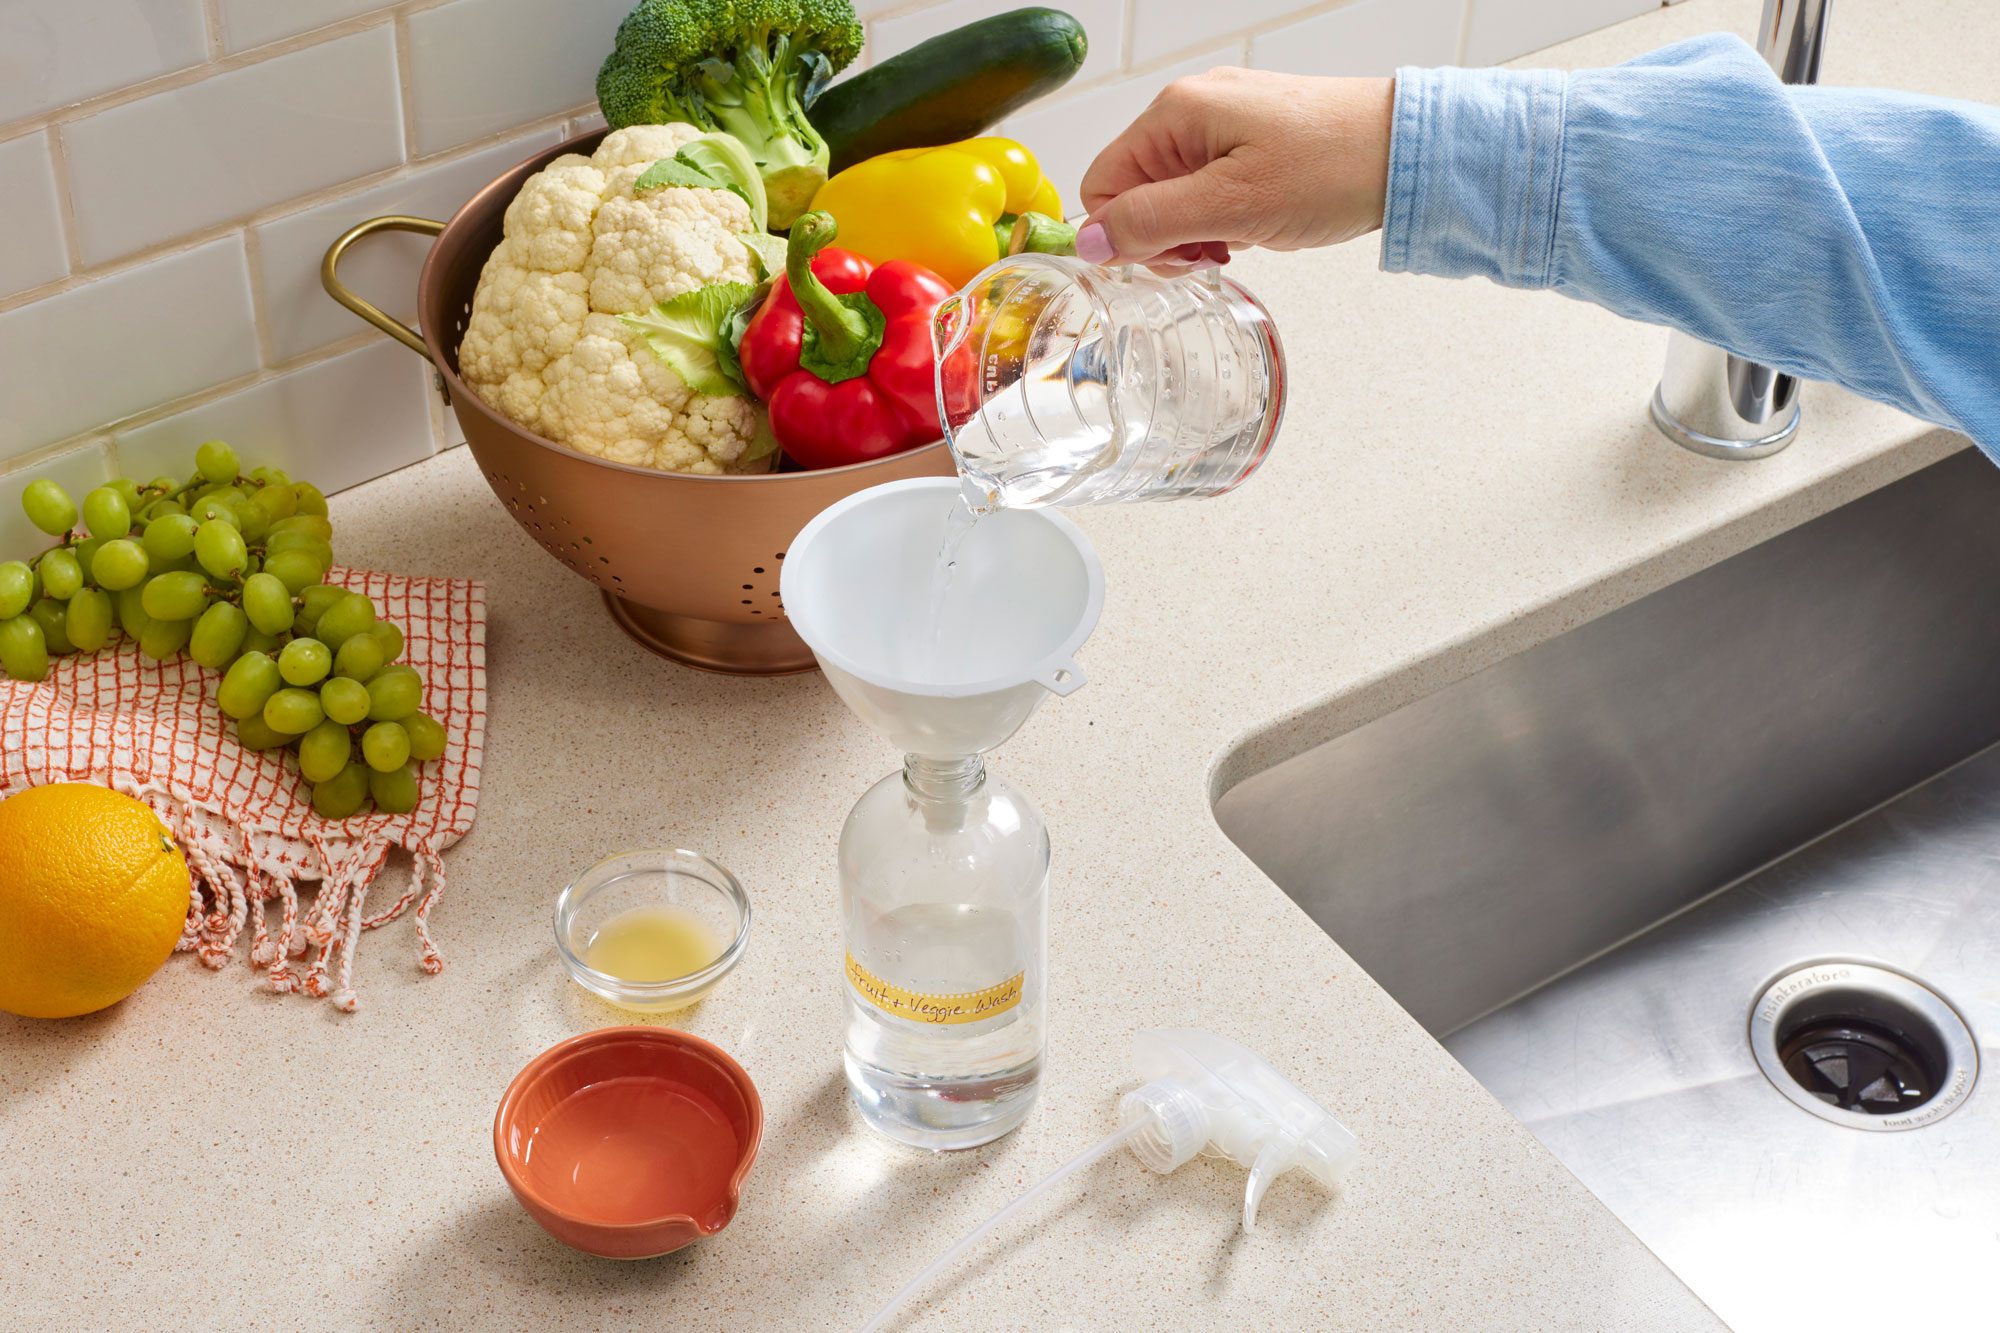 in a kitchen environment near the skin, a hand is pouring homemade fruit and veggie wash ingredients into a spray bottle using a funnel. some fresh fruit and vegetables are on the counter nearby